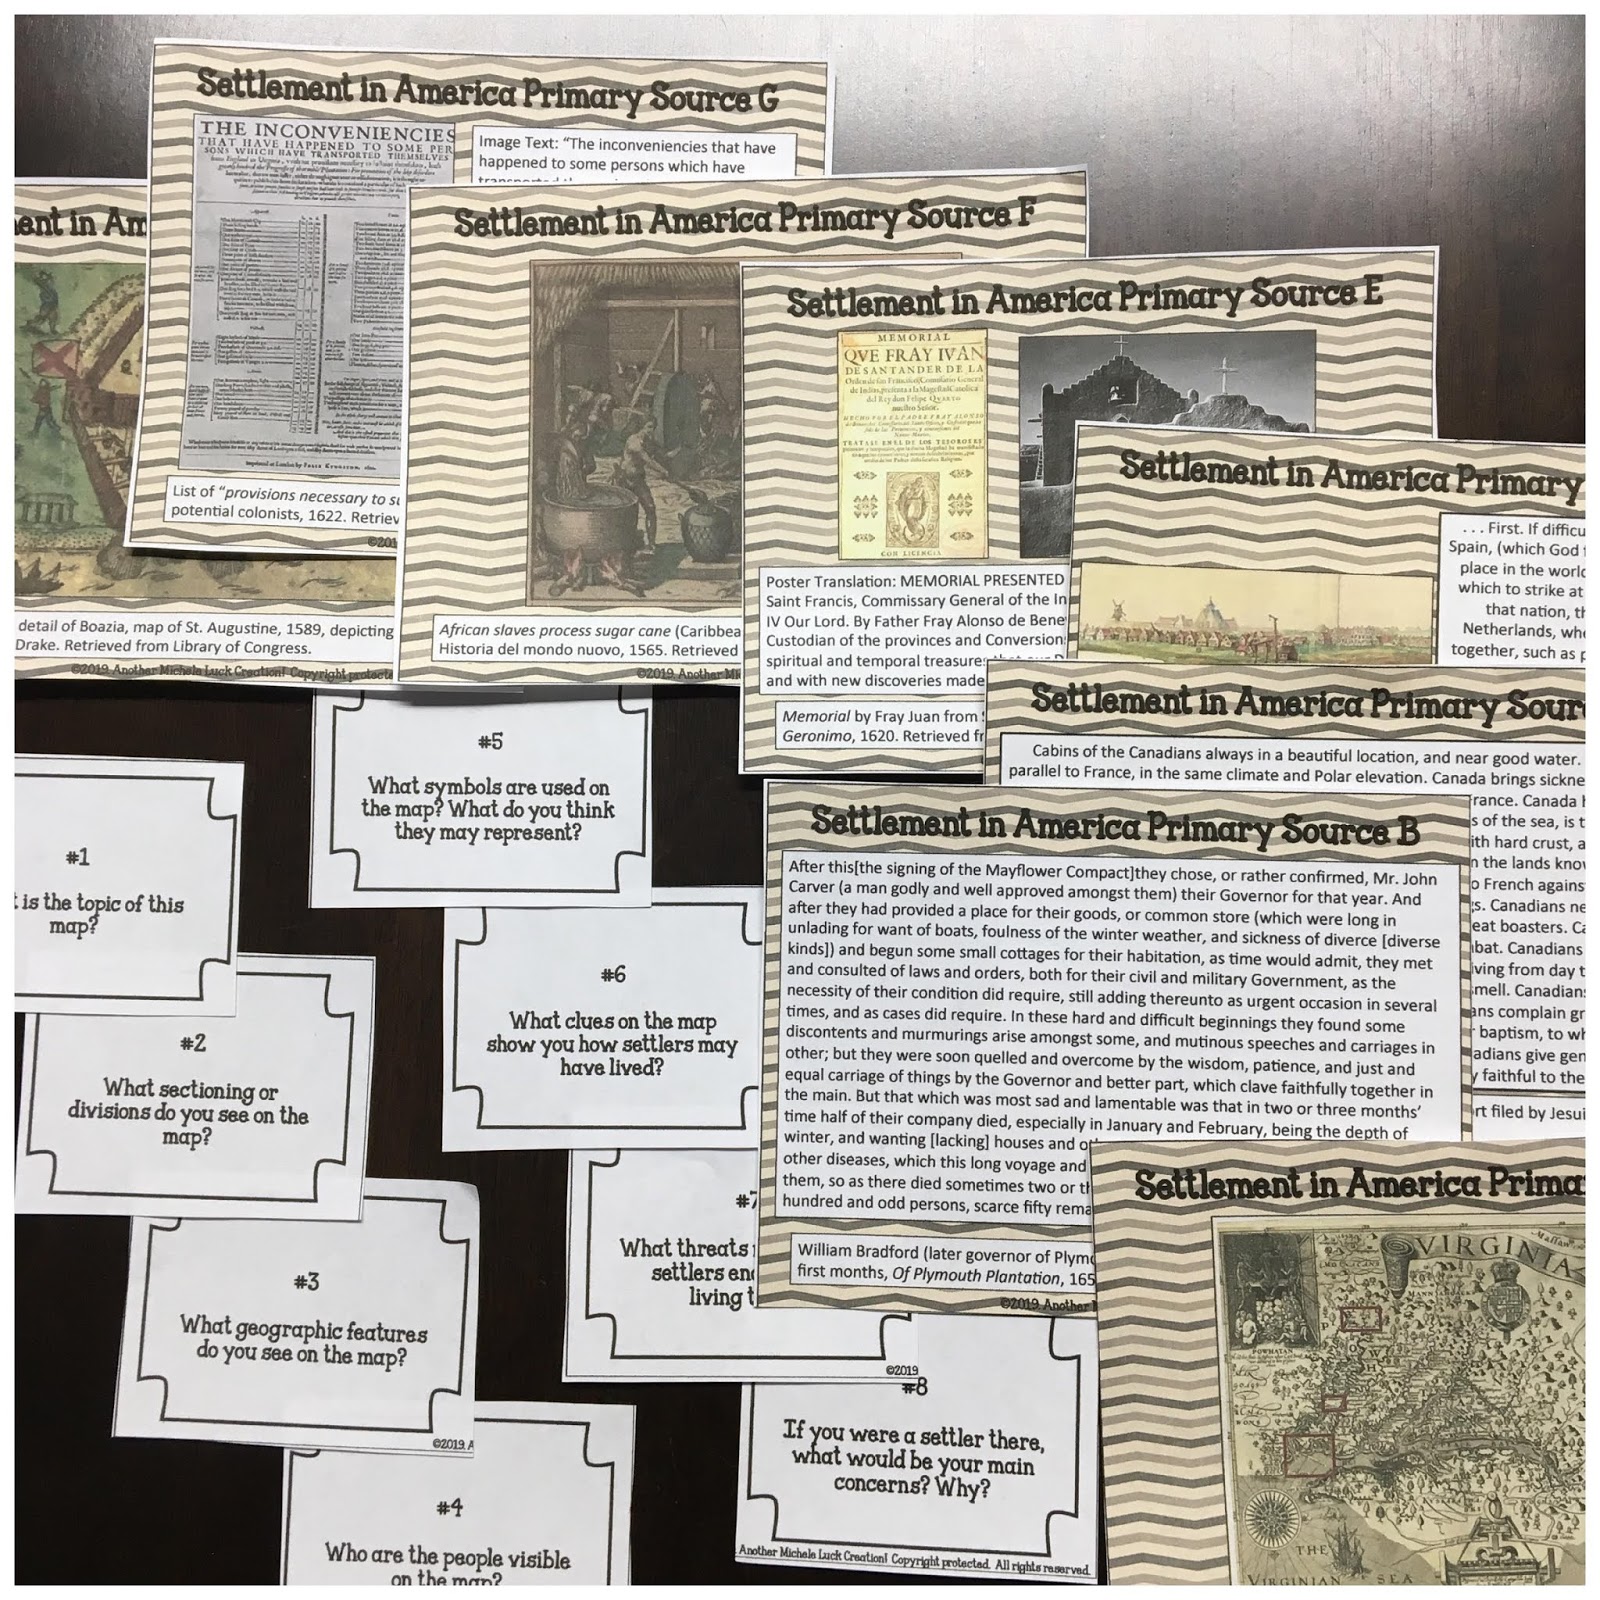 Middle school teachers, Excavate Ancient Civilizations with your class as students explore images and analyze text to spark inquiry. #middleschoolteachers #teachinginquiry #criticalthinking #primarysourceanalysis